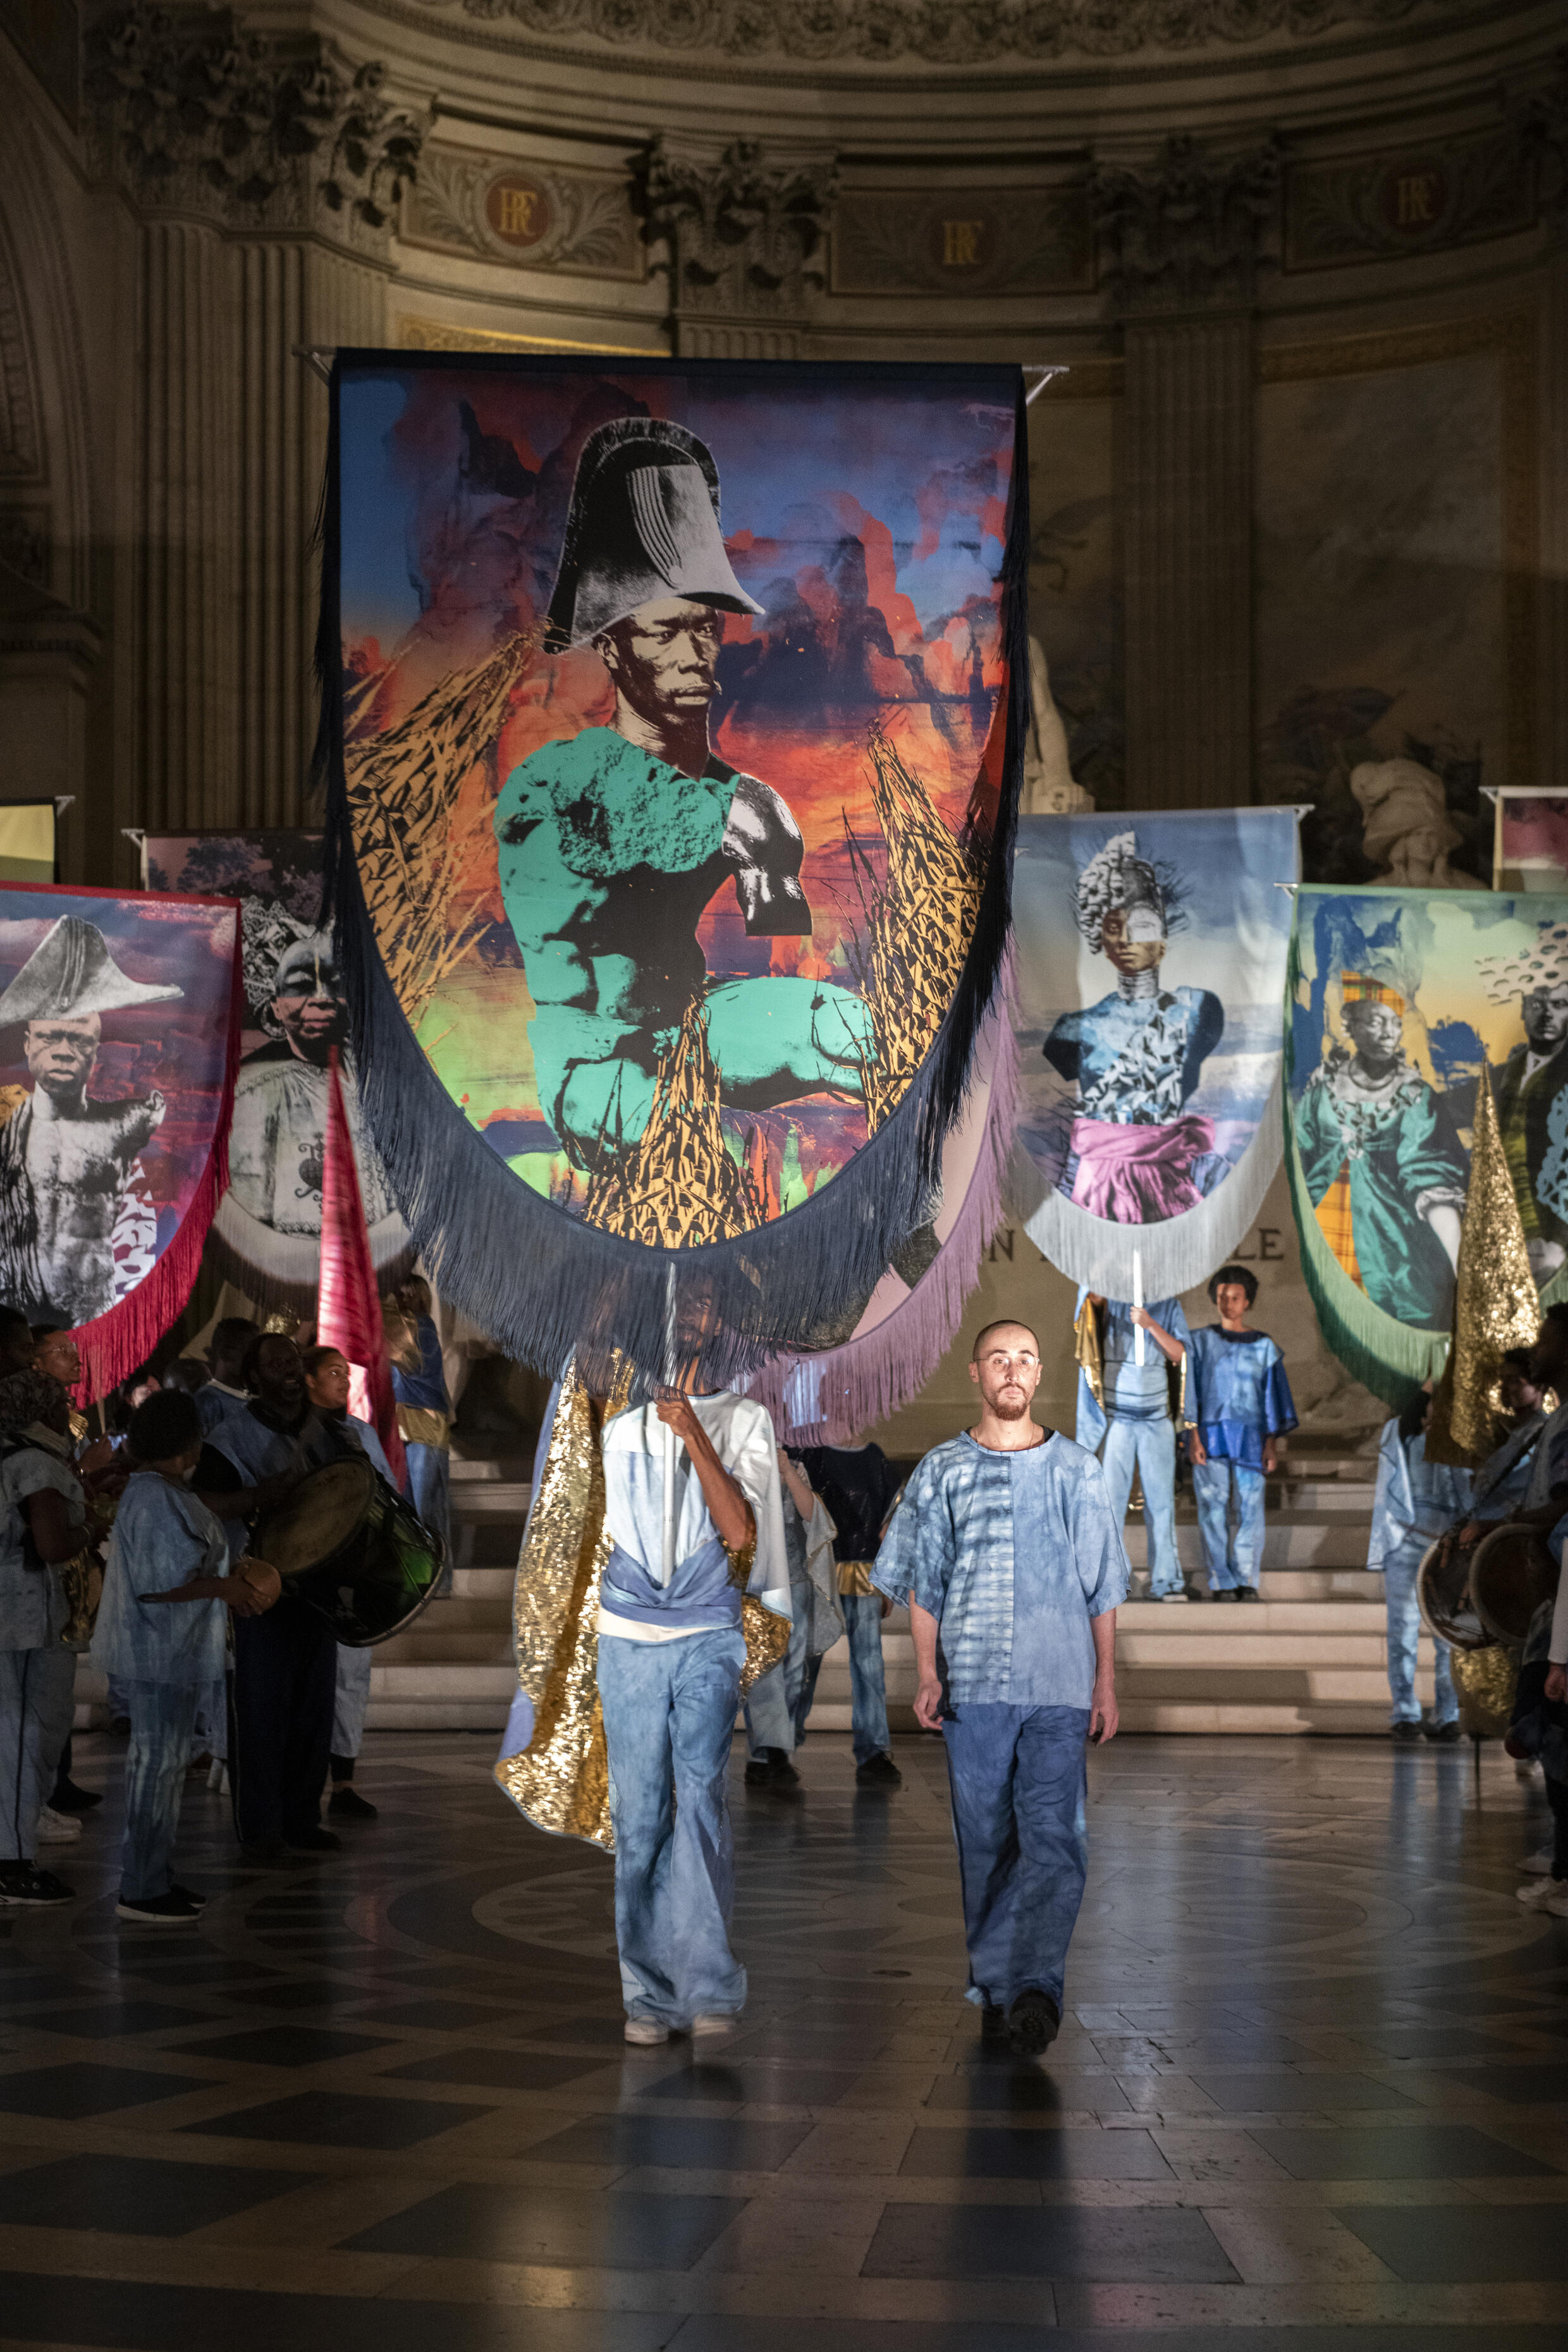 Raphaël Barontini's exhibition "We Could be Heroes" at the Pantheon in Paris.